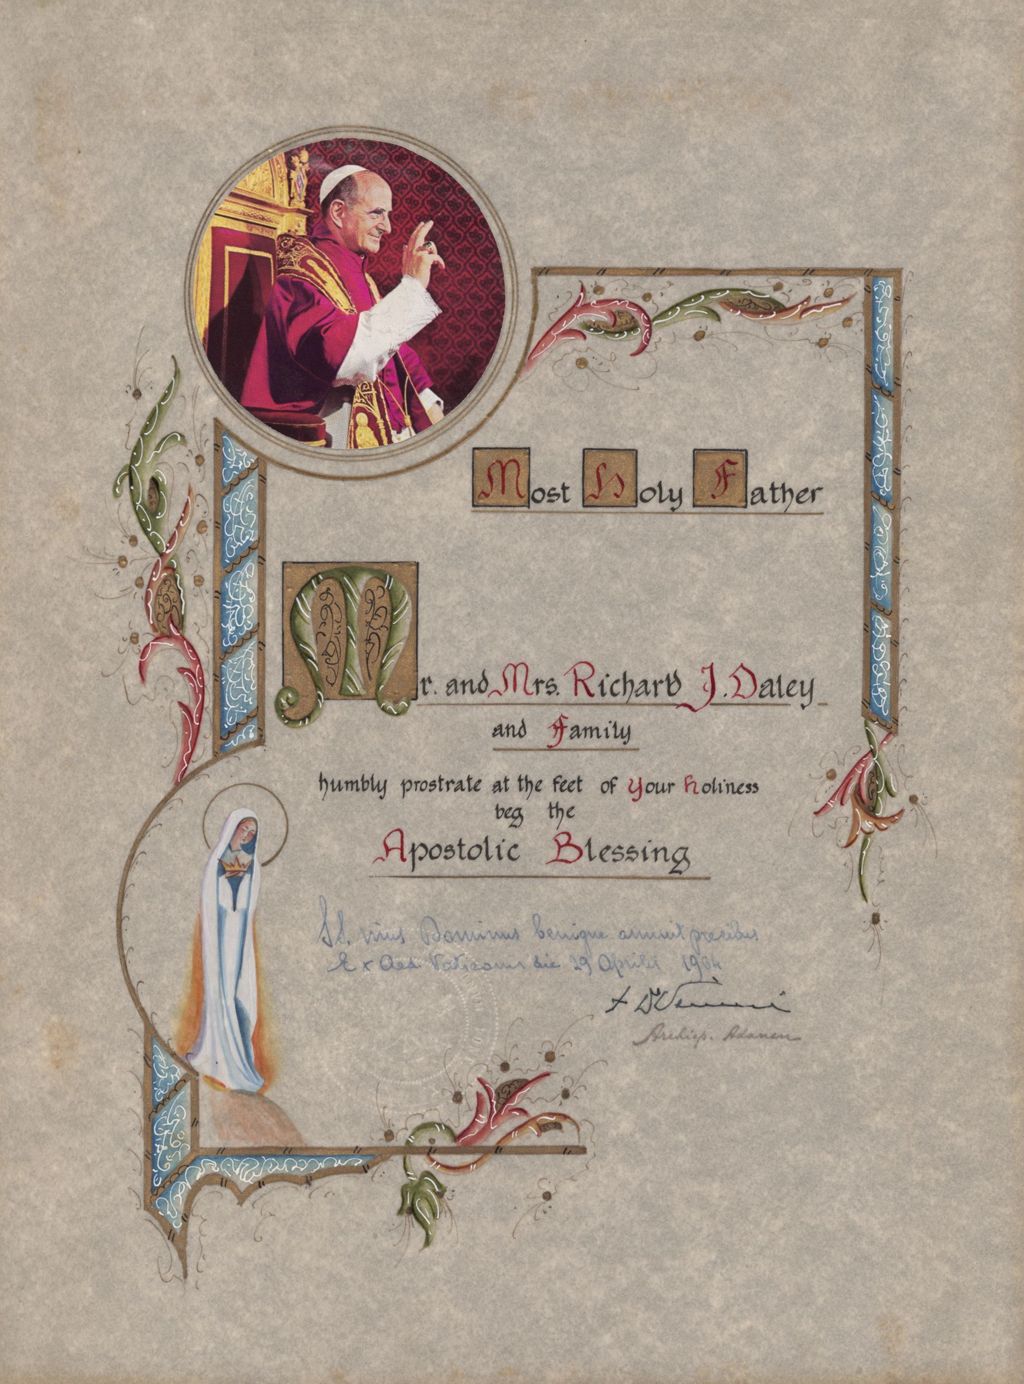 Papal blessing parchment from Pope Paul VI for Richard J. Daley and family